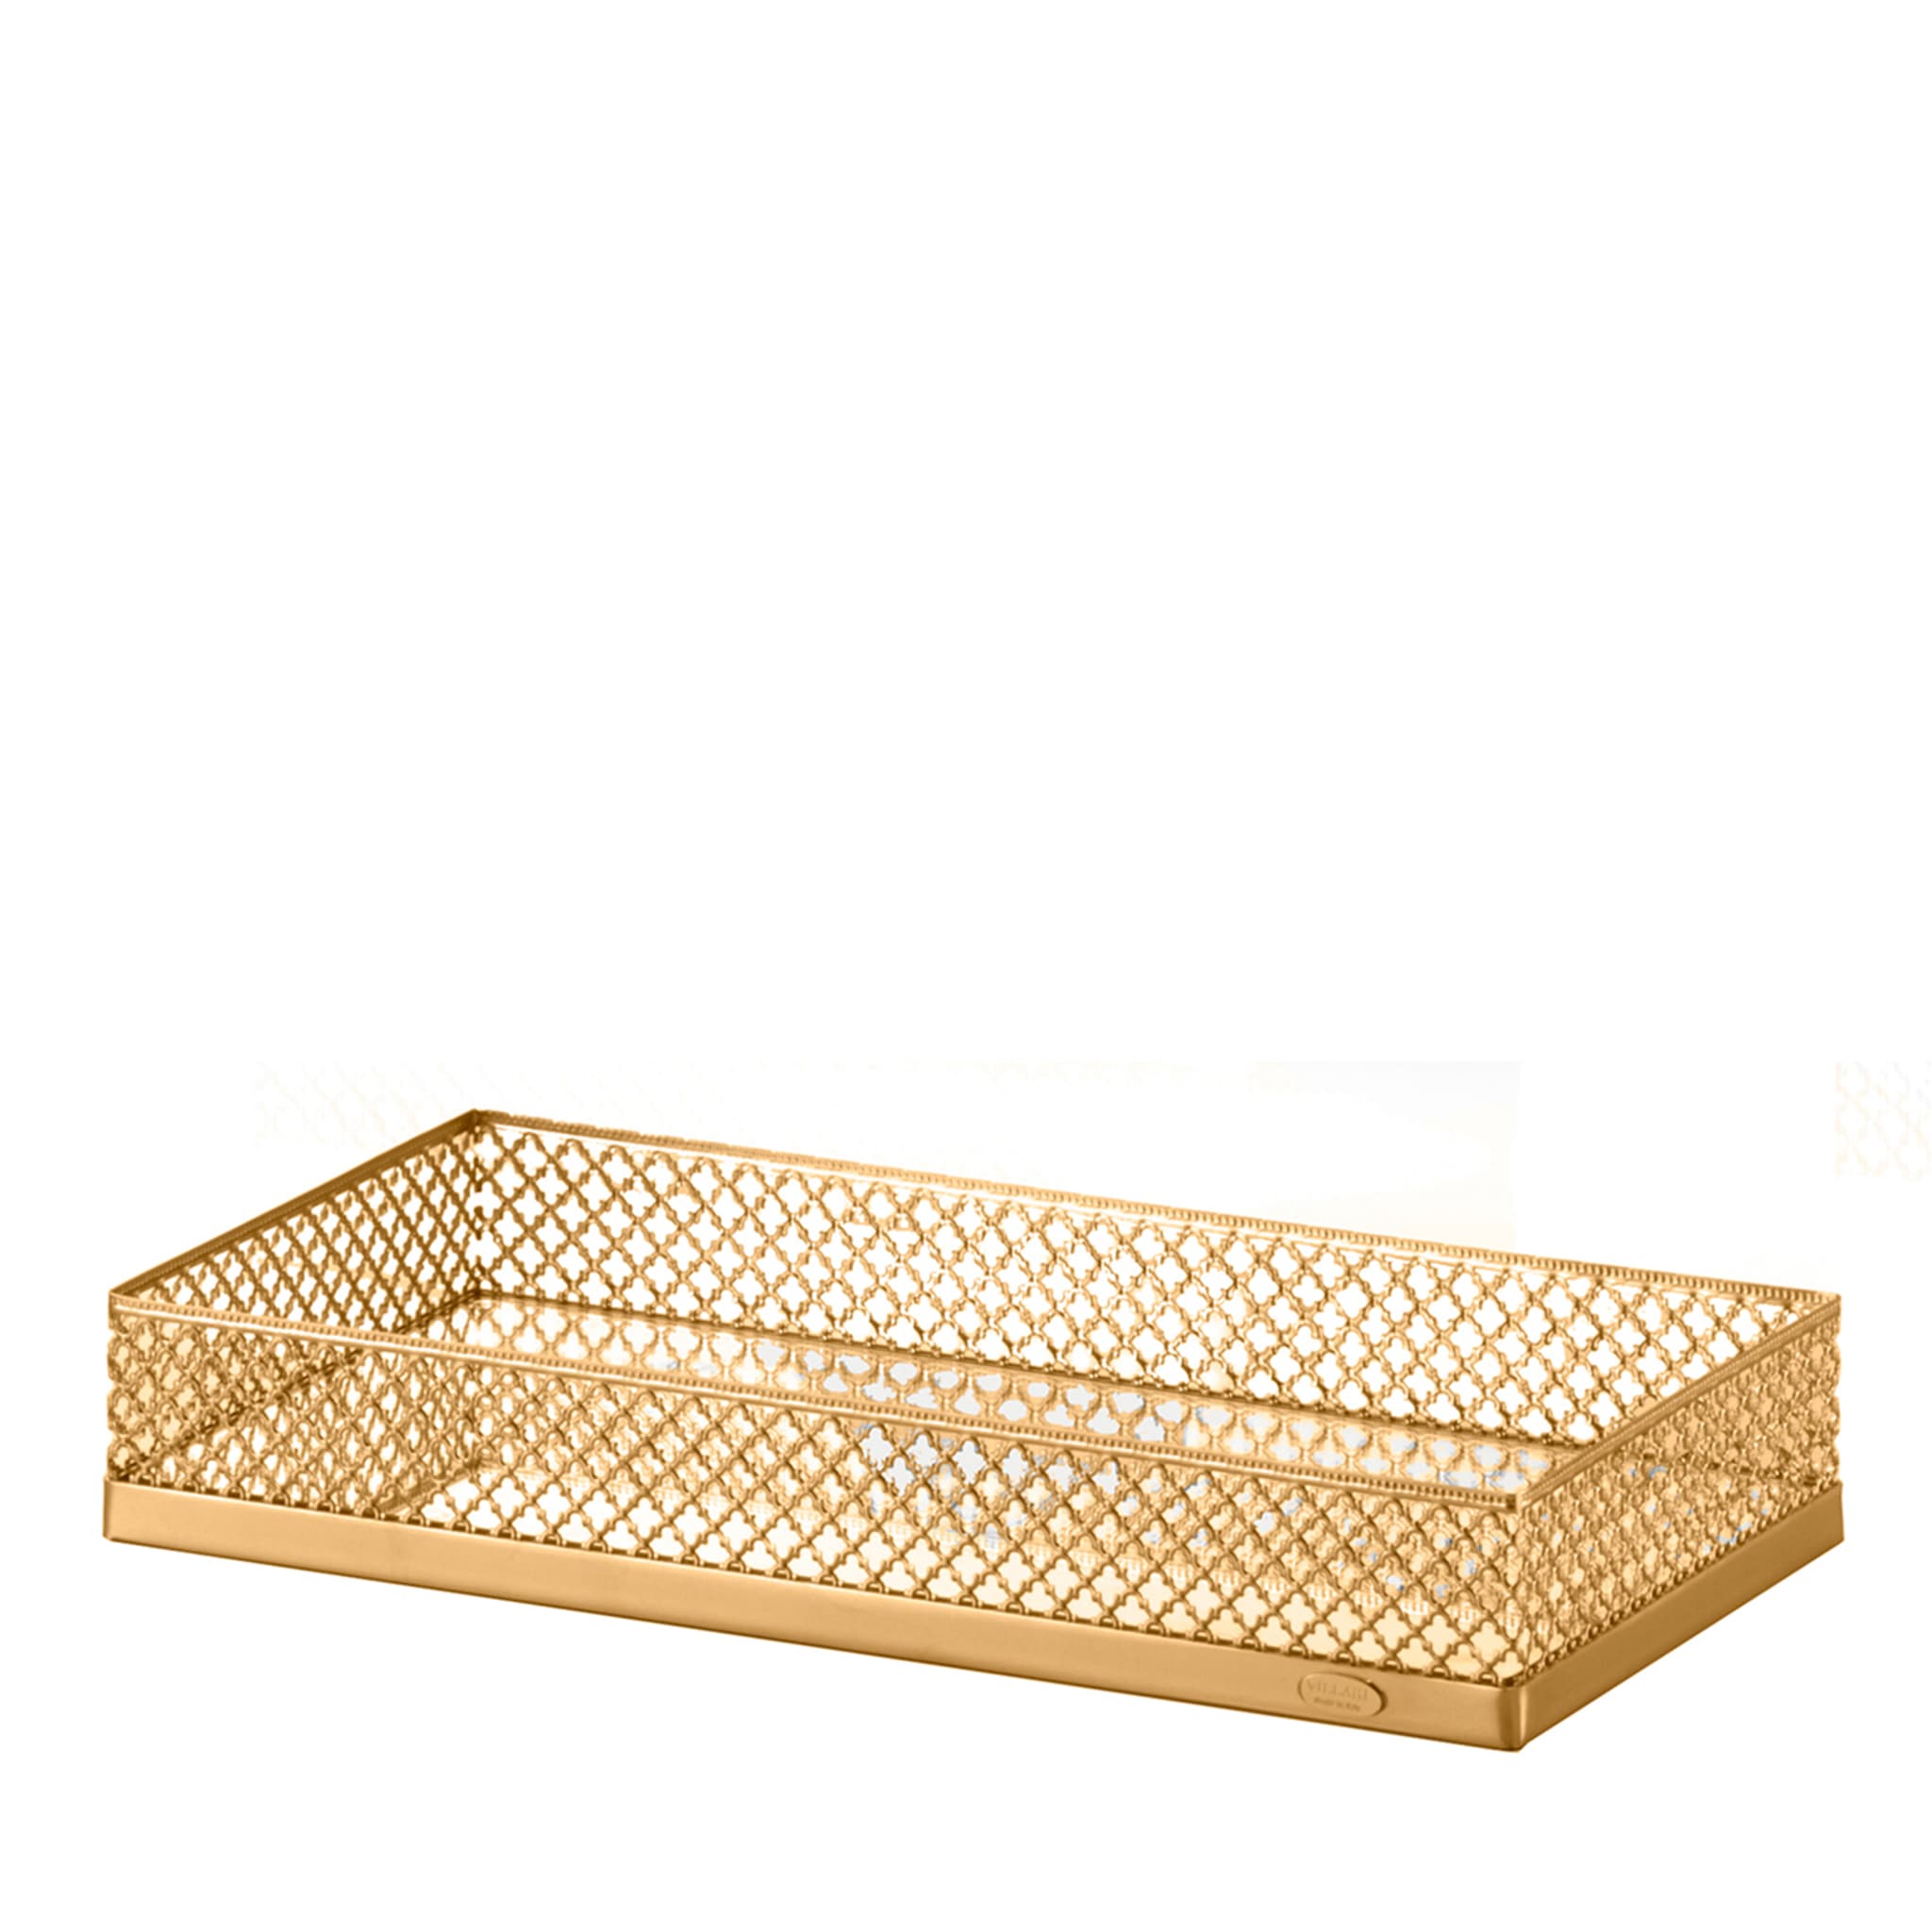 SMALL FIRENZE TRAY - GOLD - Main view